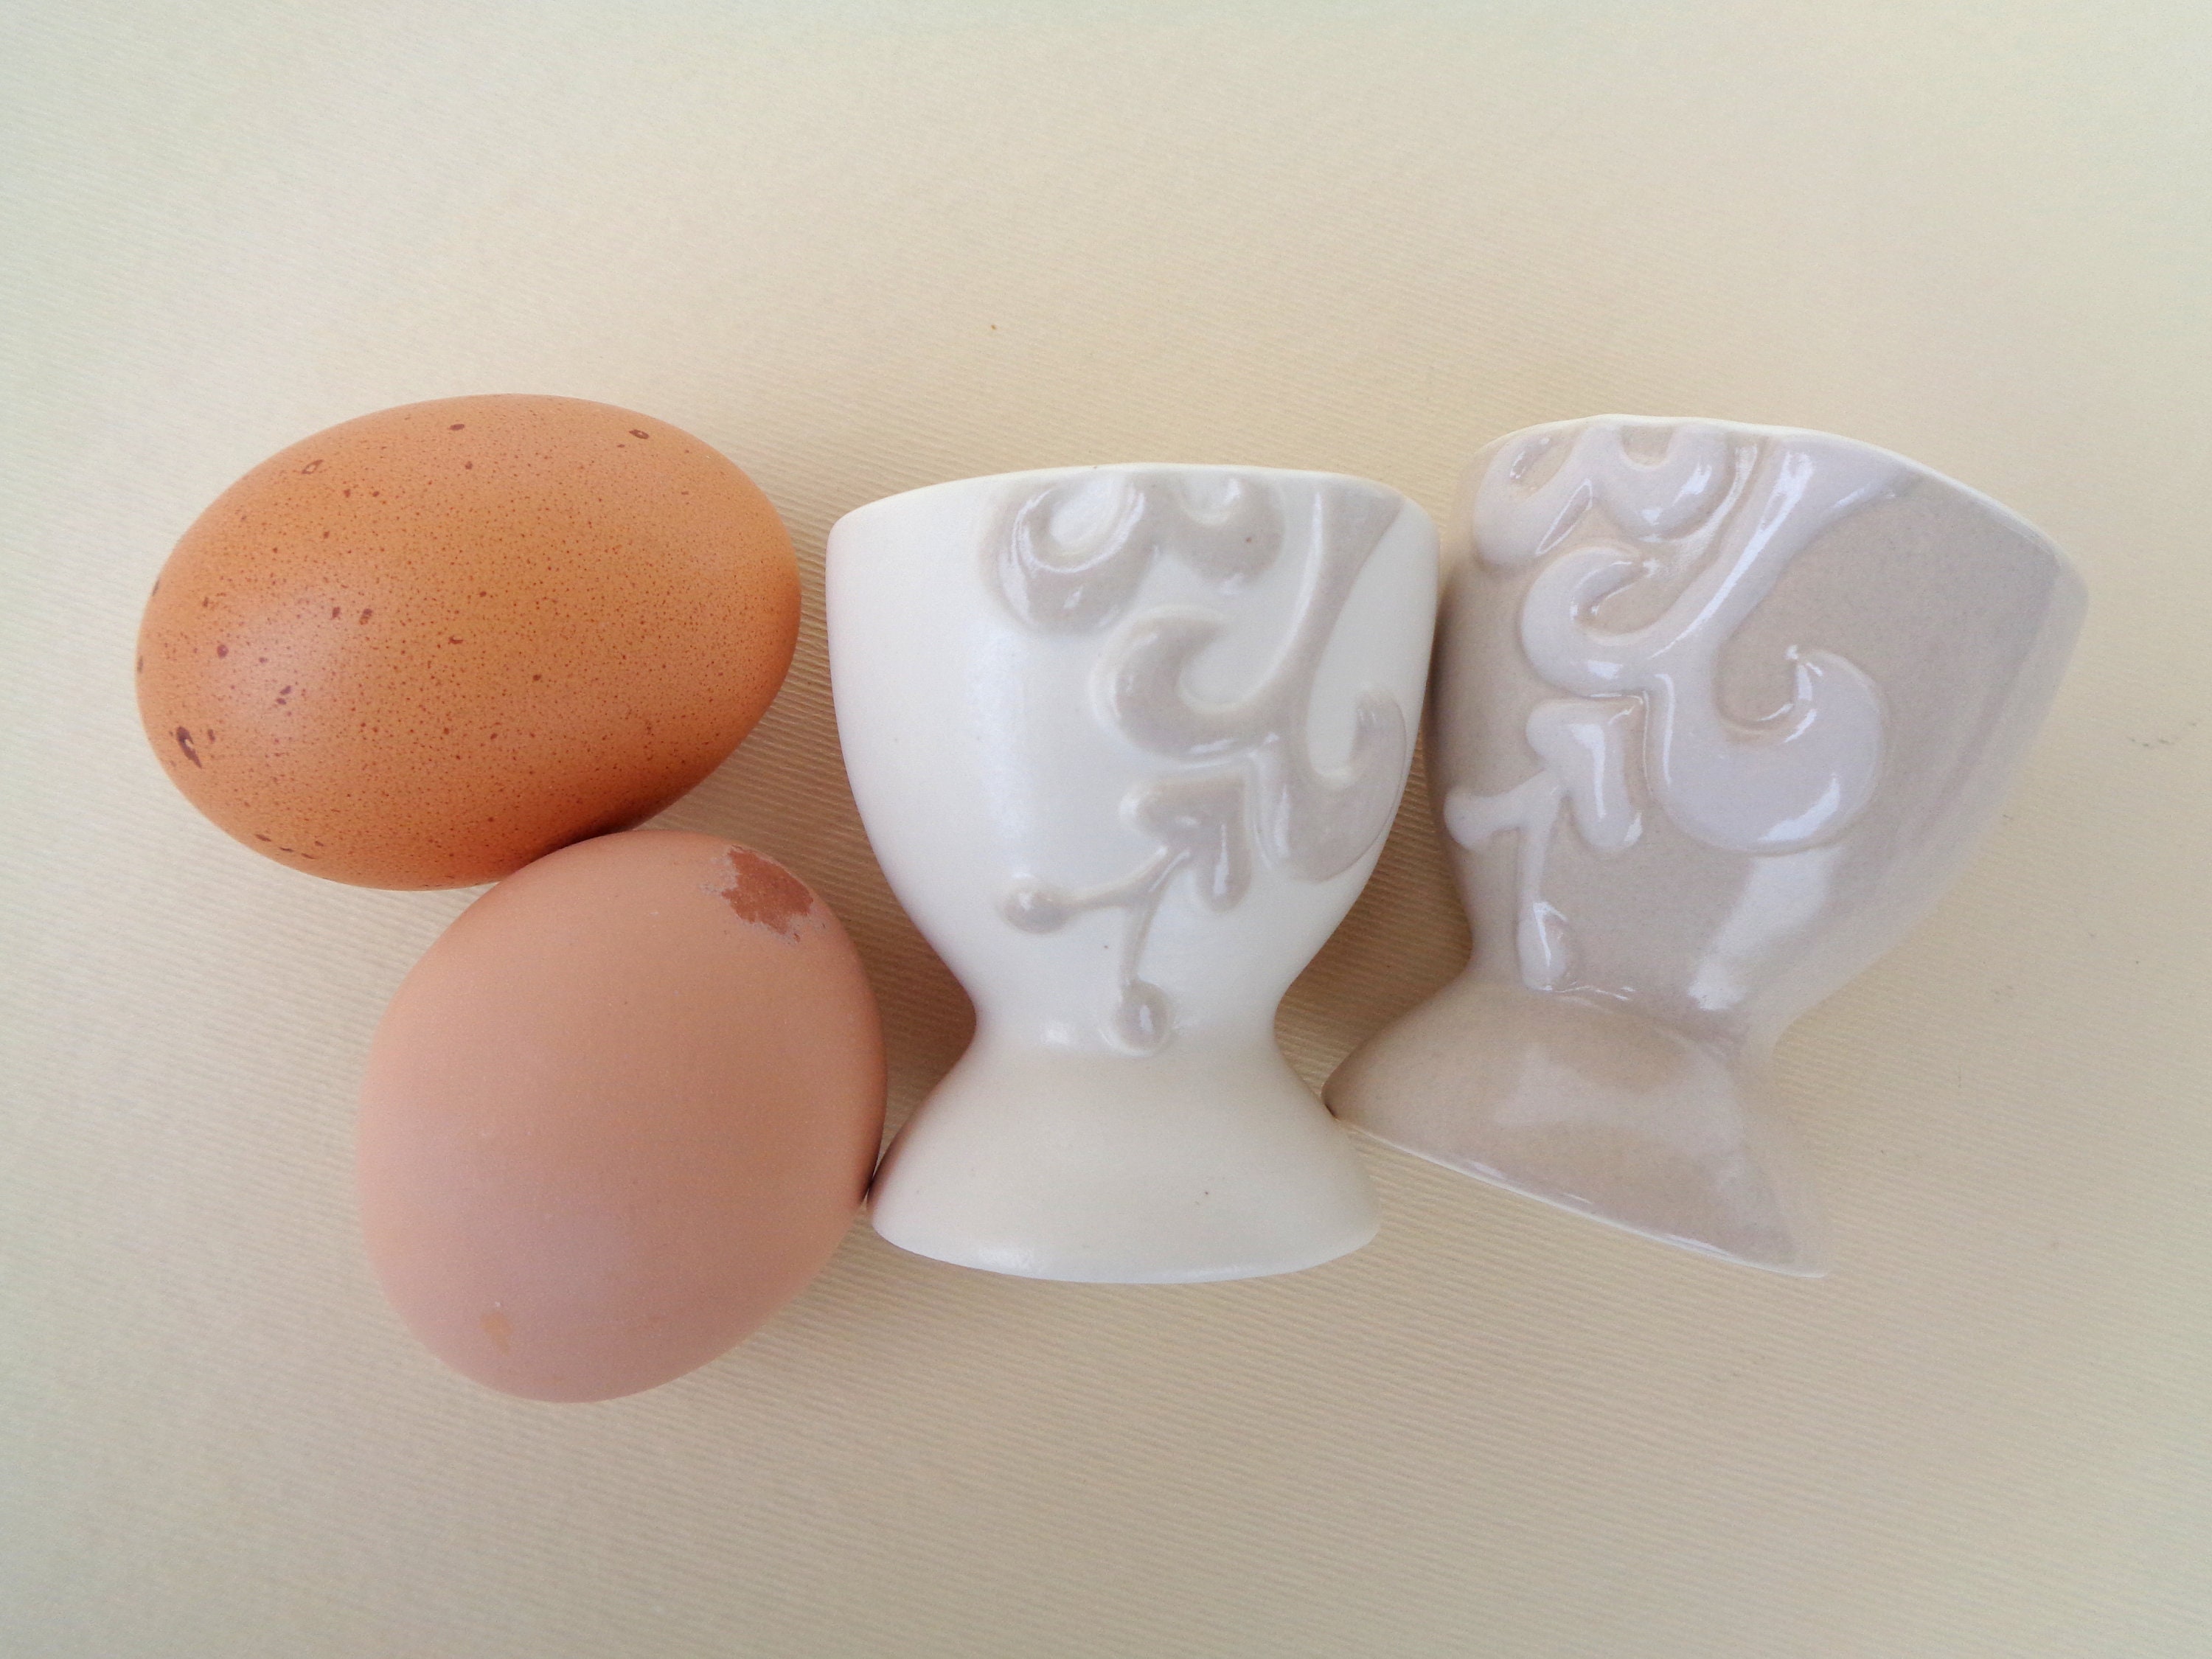 1pc Egg Cup Holder, Mini High-footed Egg Cup, Eggshell For Soft